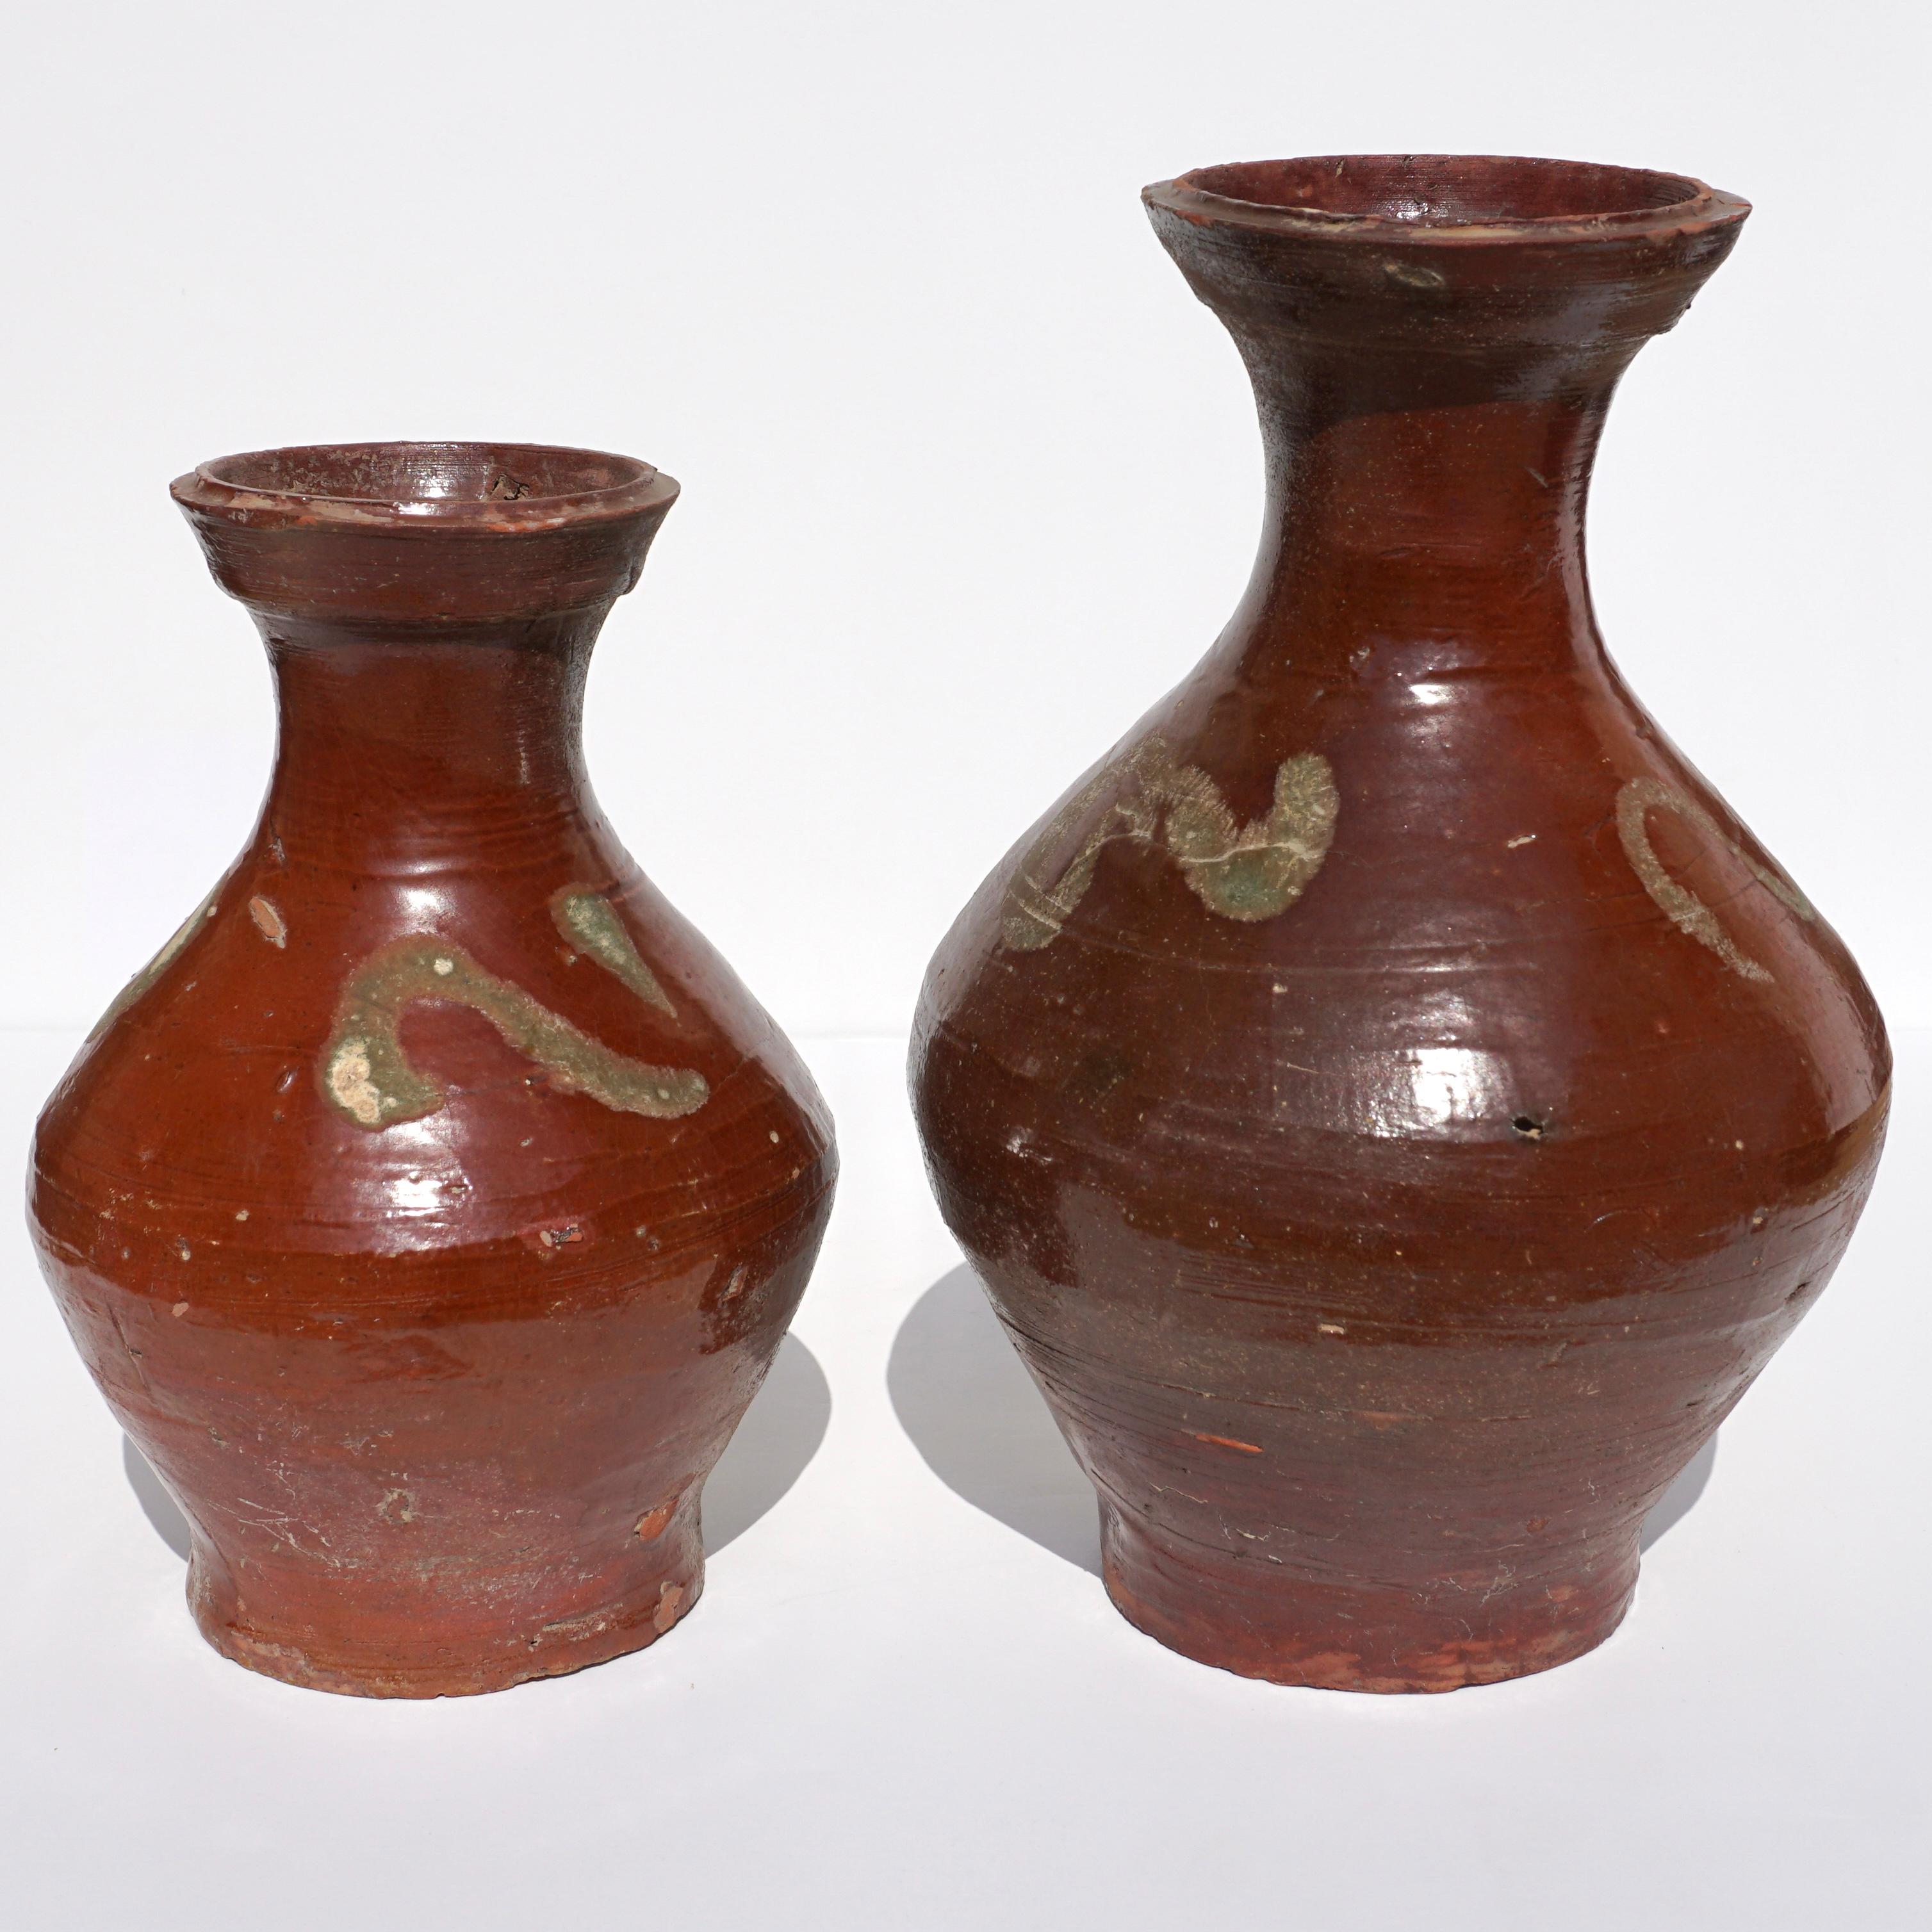 C. AD 618-907. Tang Dynasty. 

Two beautiful terracotta pottery jars covered with a ox blood to chestnut-coloured glaze. The bulbous bodies taper into a slender neck with flared rim. The shoulders are decorated with wavy pattern swishes.

It was not